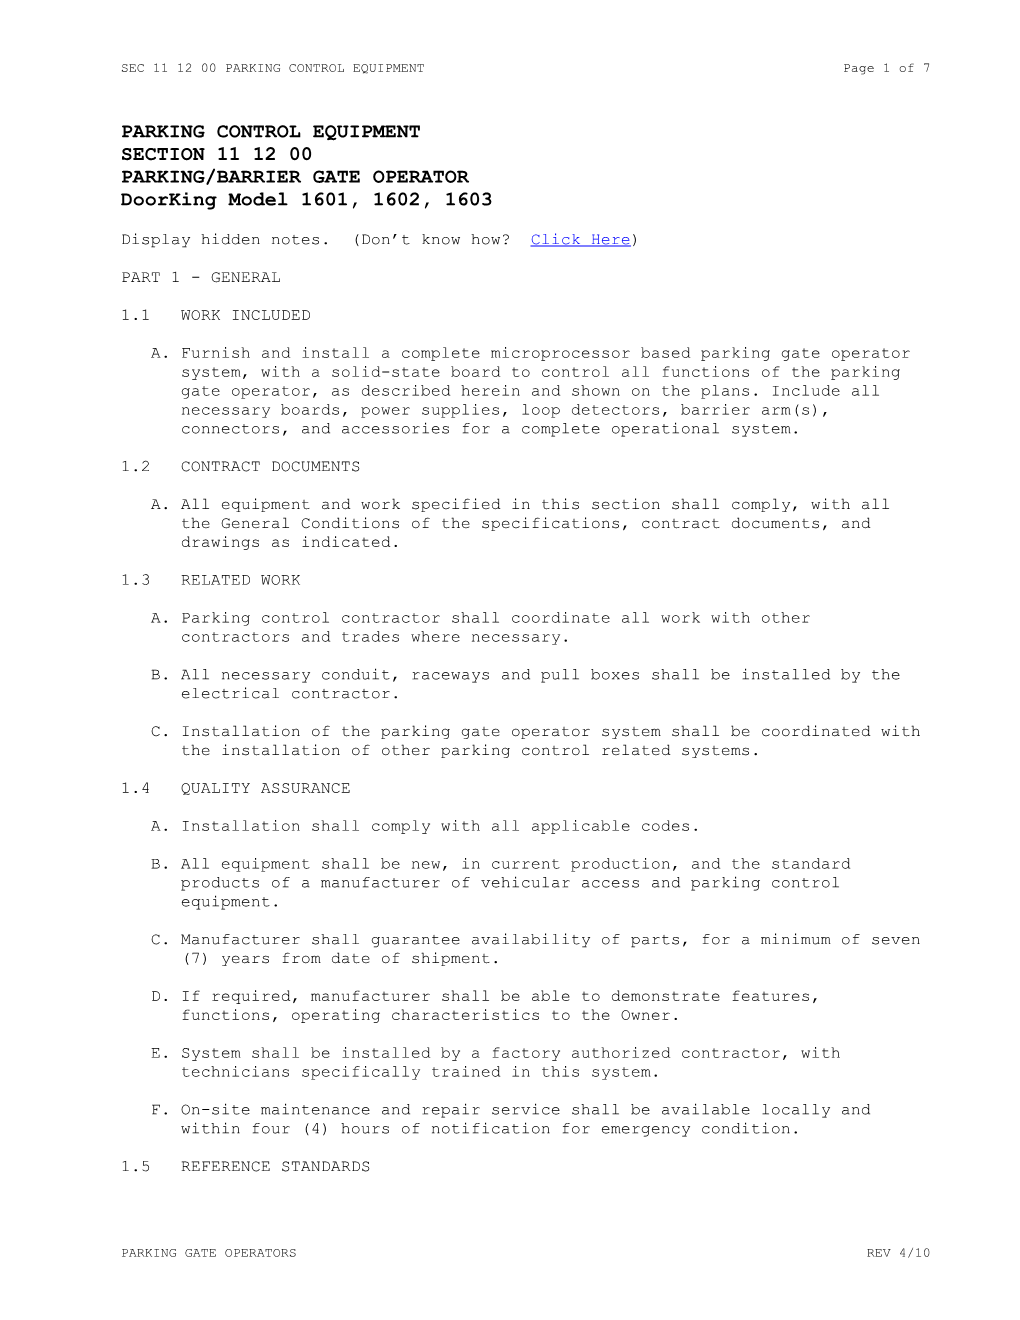 SEC 11 12 00 PARKING CONTROL EQUIPMENT Page 7 of 8